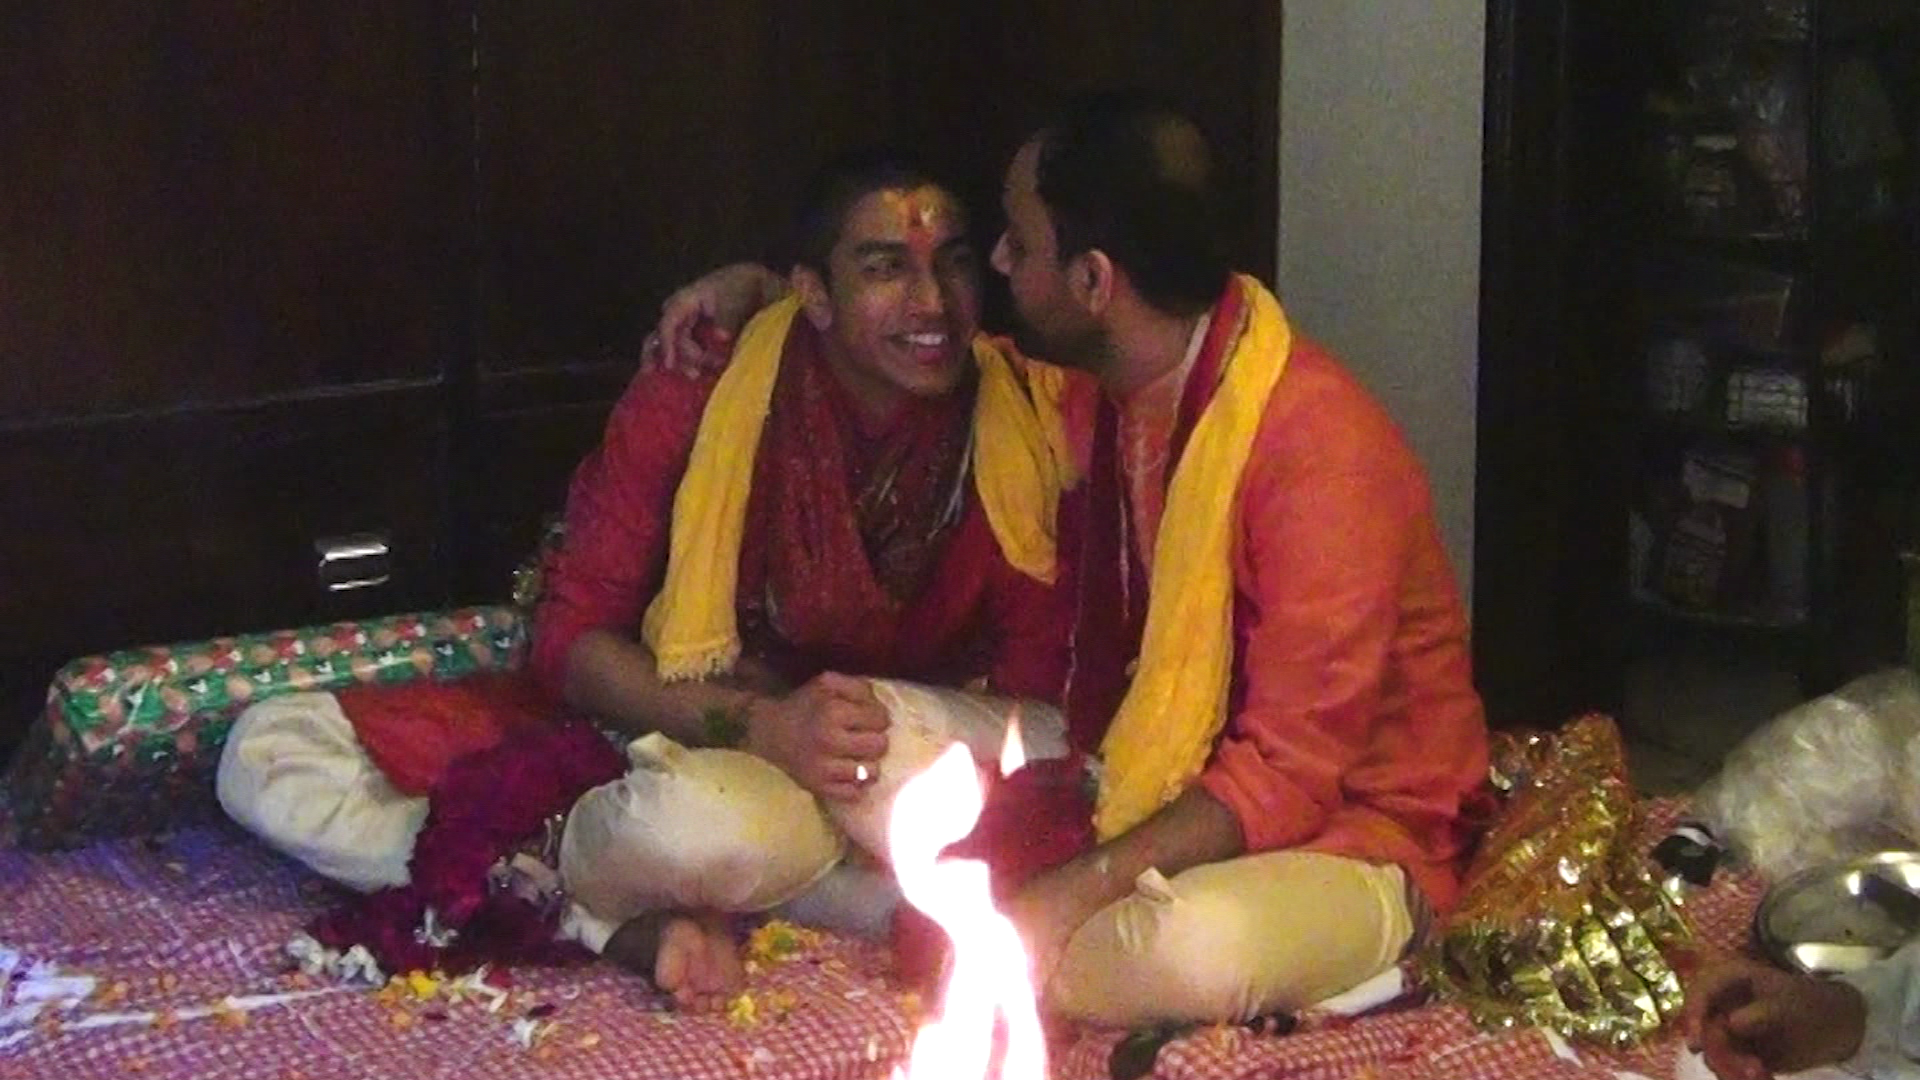 Vedika Xxx - This Indian gay couple got secretly married. Now they are fighting for  recognition | CNN